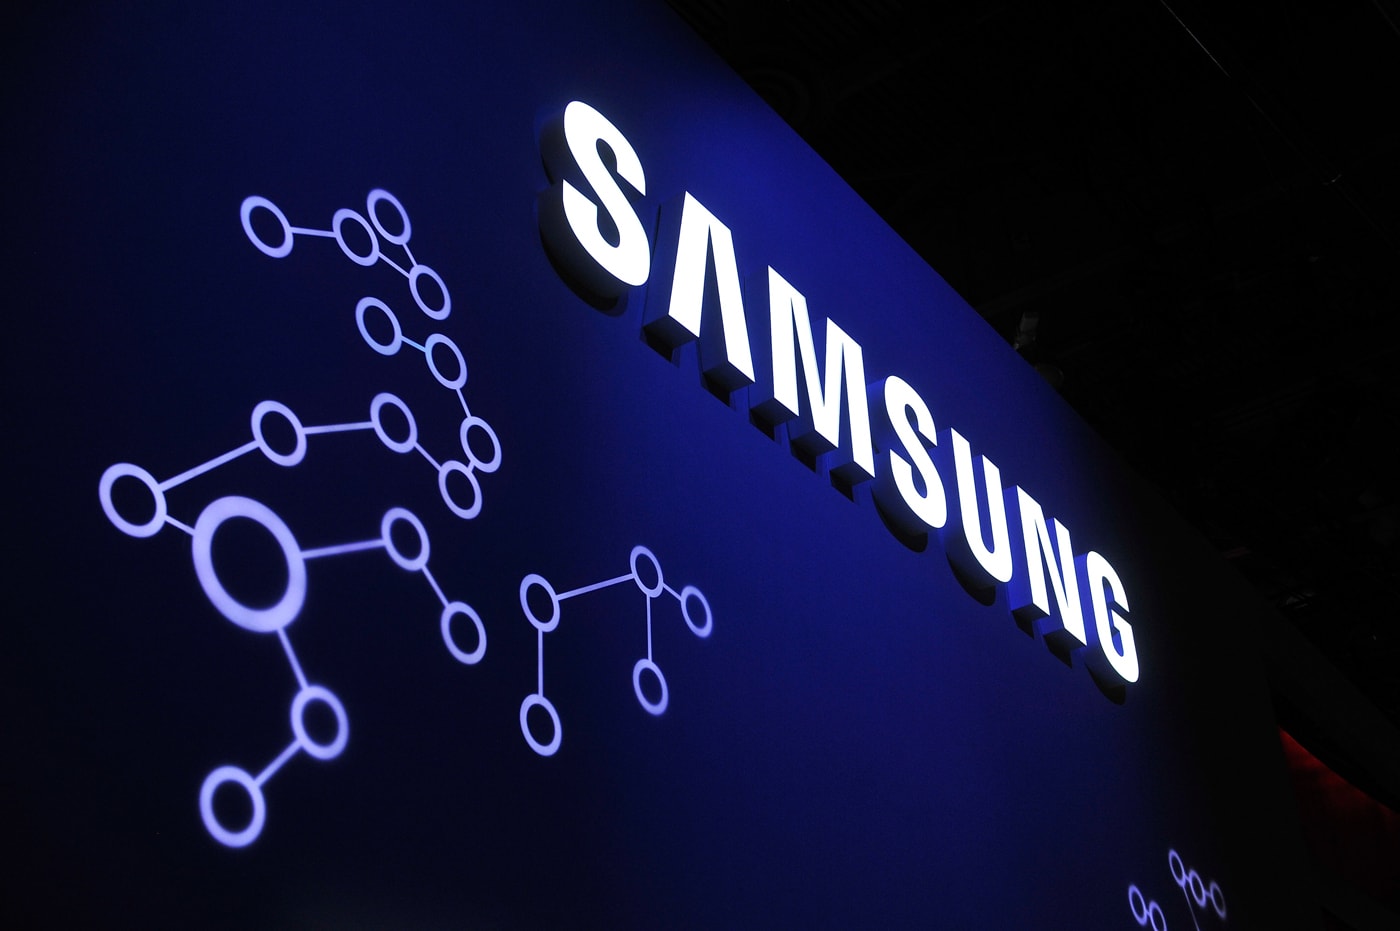 Samsung Begins Working on 6G Network At New Research Facility Korea South Seoul Suwon technology data speeds 5G Galaxy S10+ Advanced Communications Research Center telecommunications